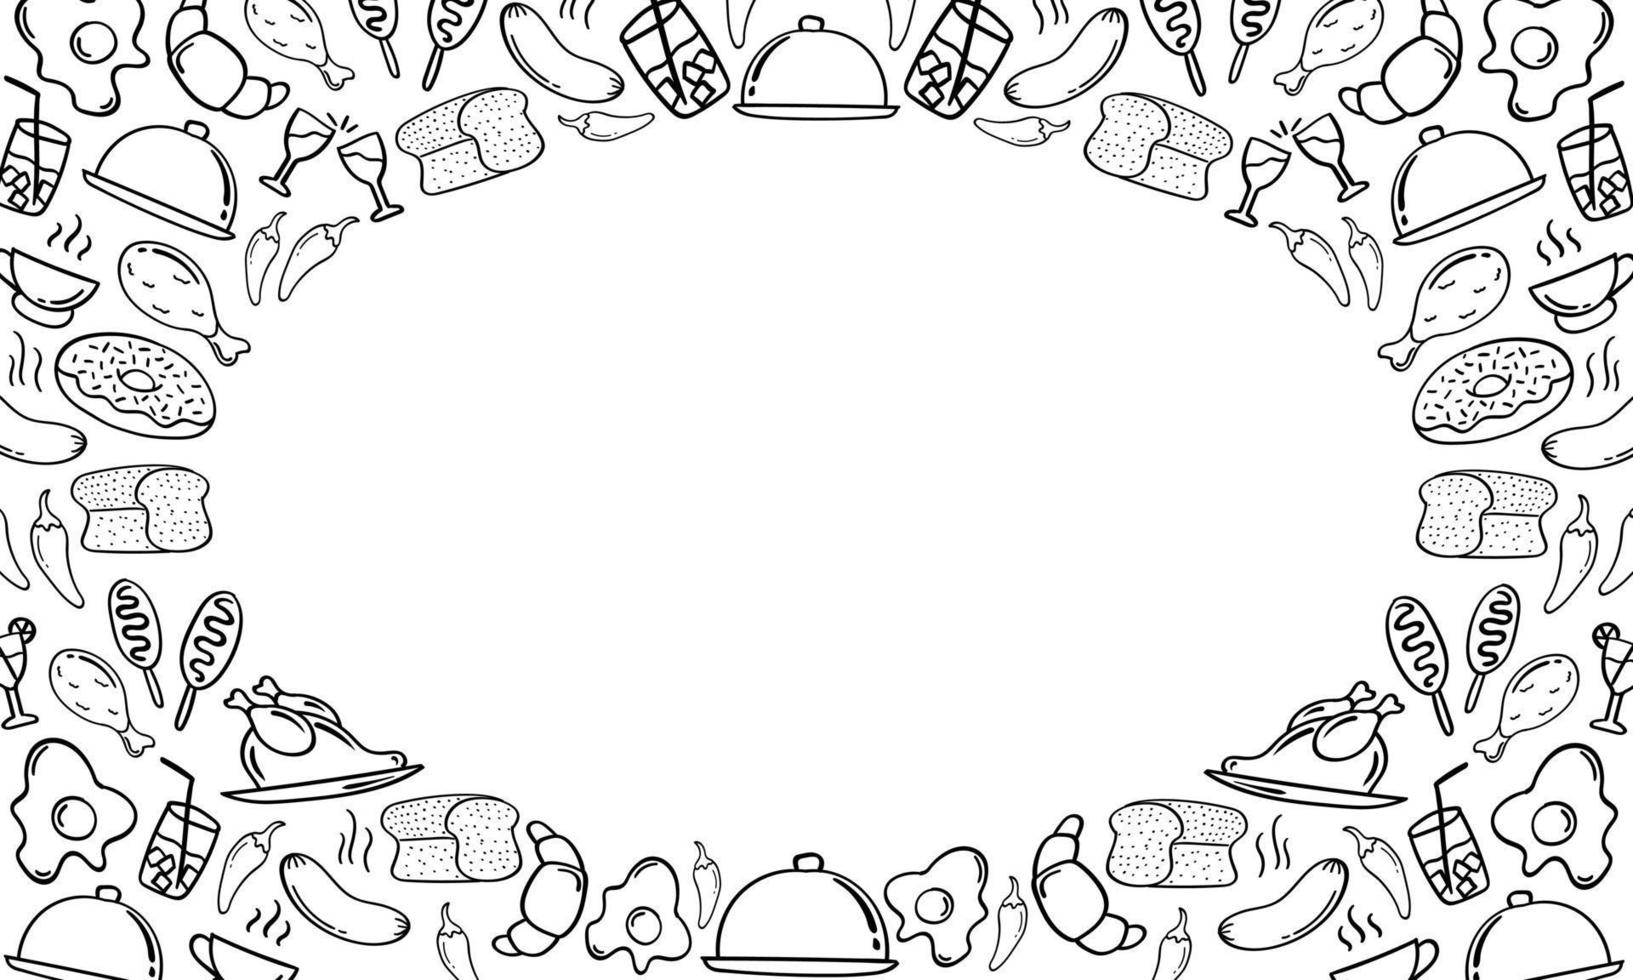 Frame of hand drawn food and beverage vector